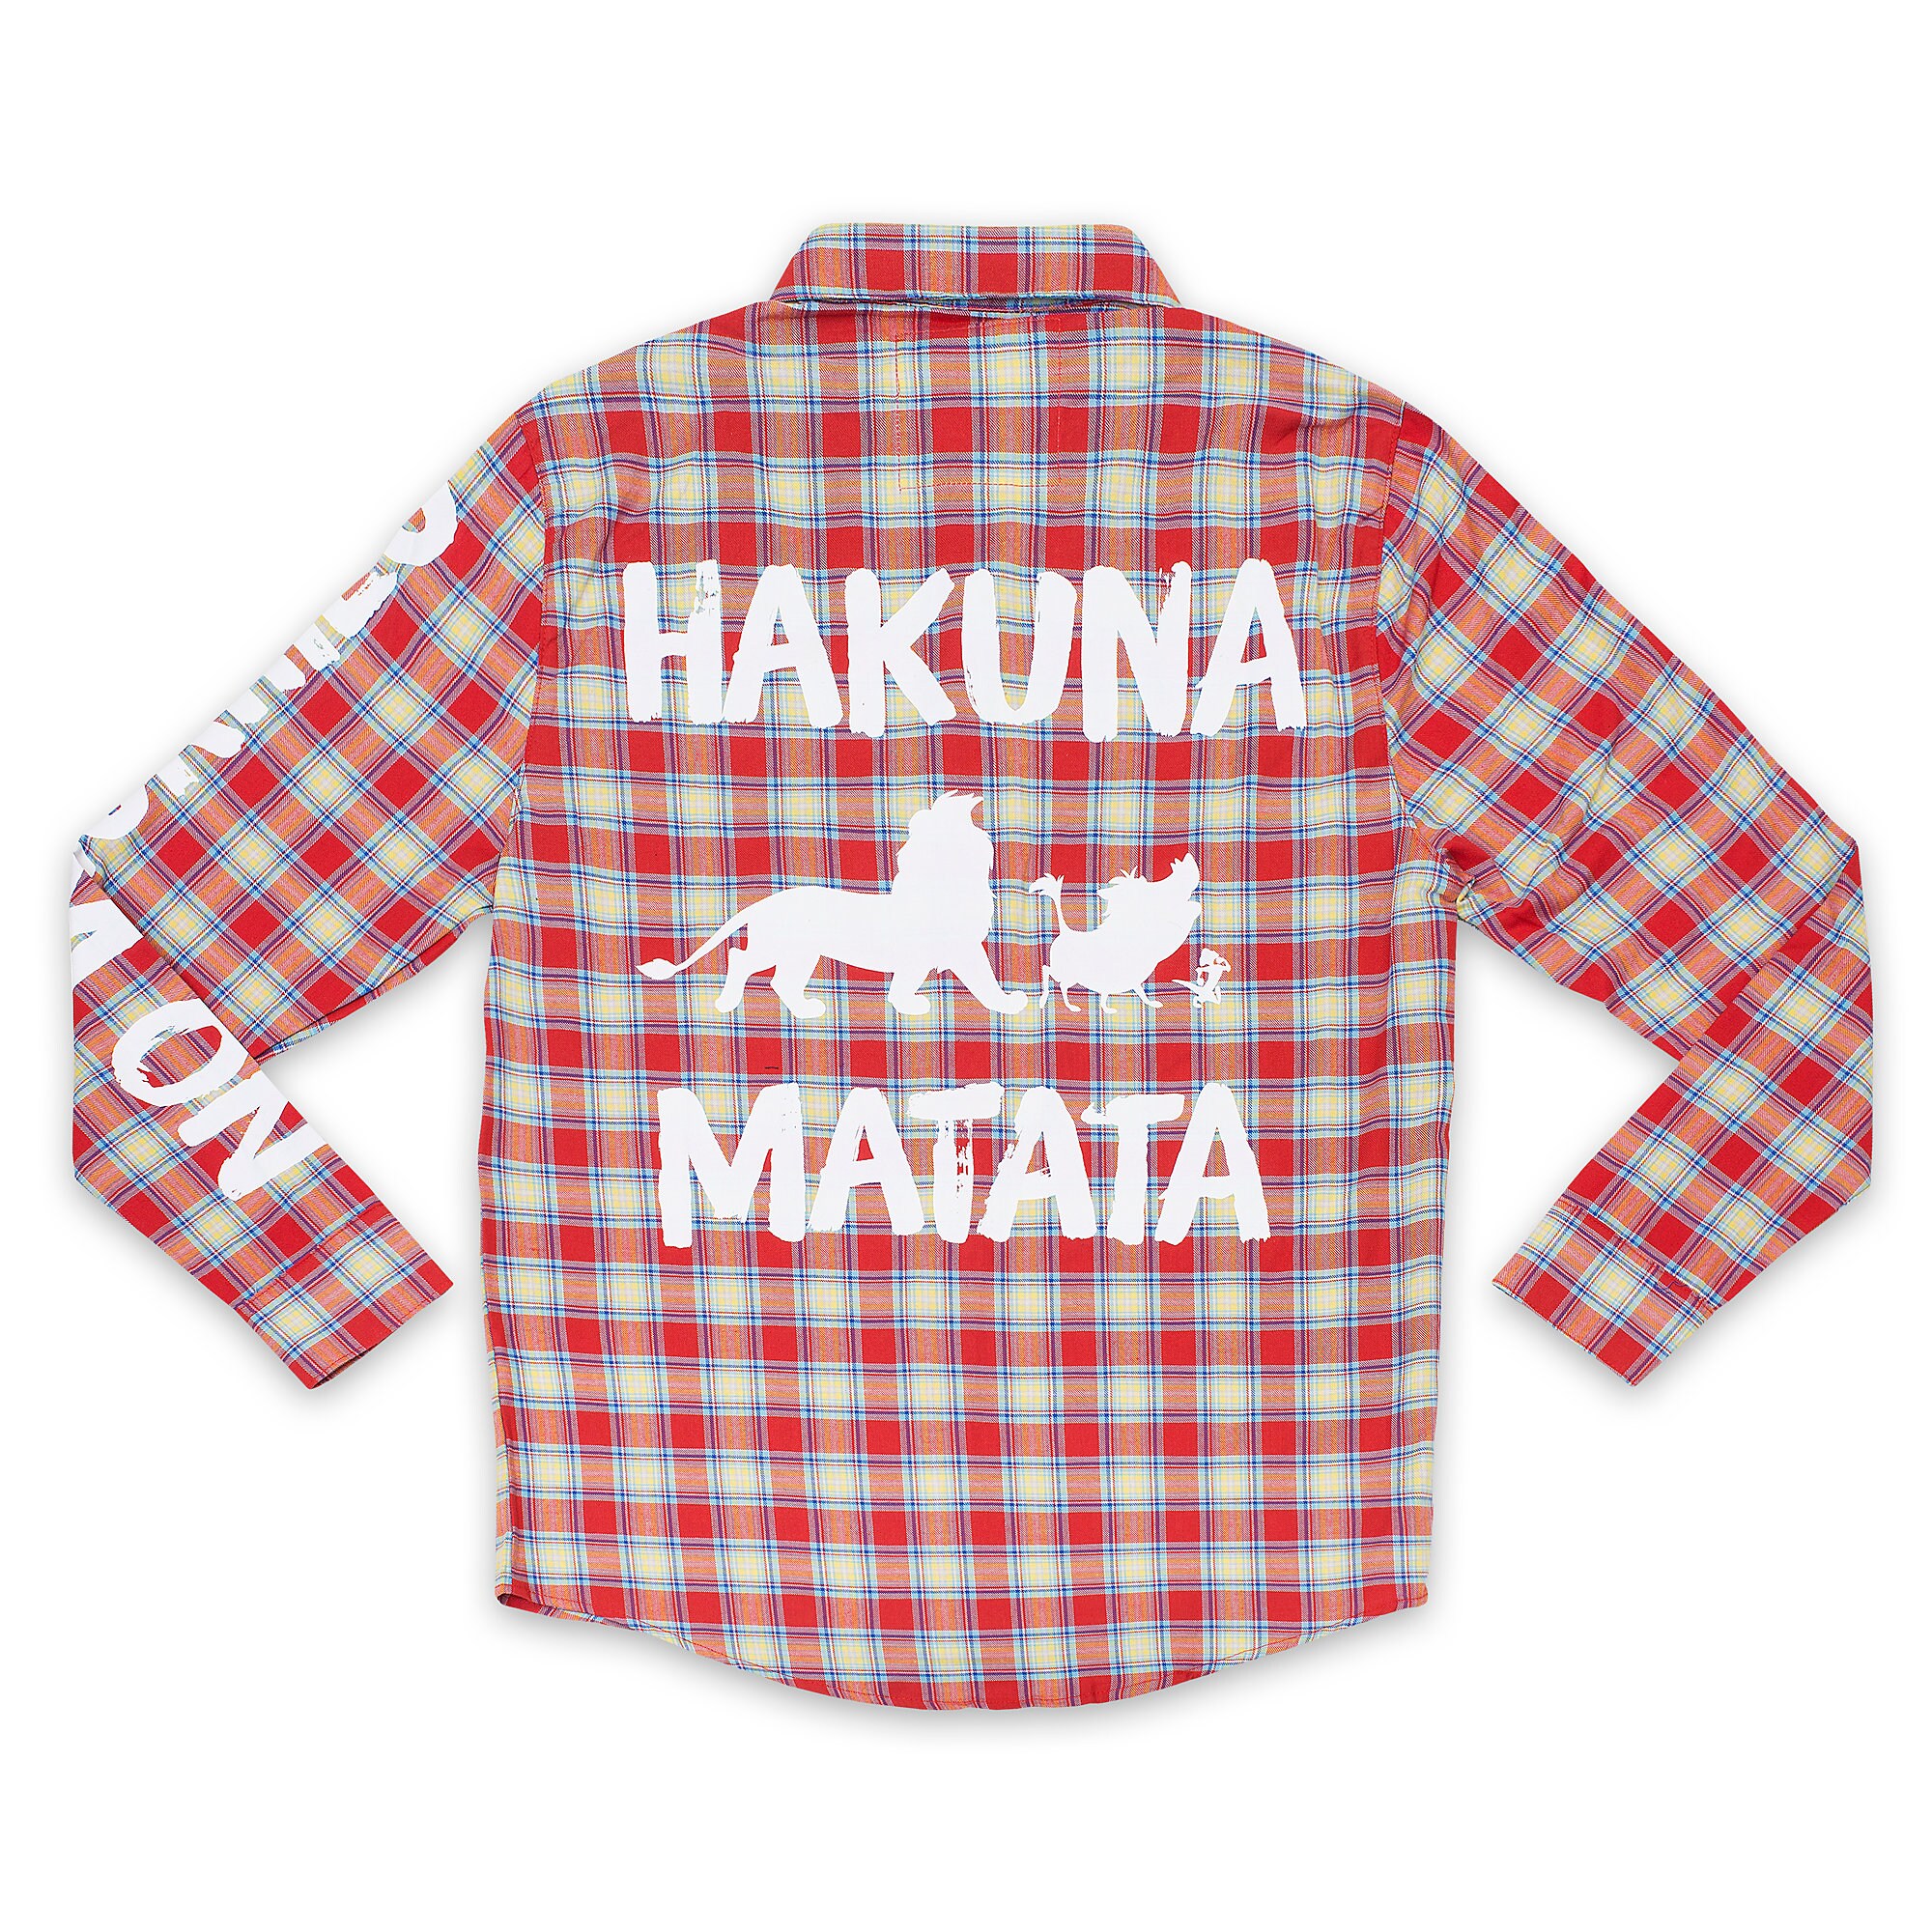 Hakuna Matata Flannel Shirt for Adults by Cakeworthy - The Lion King